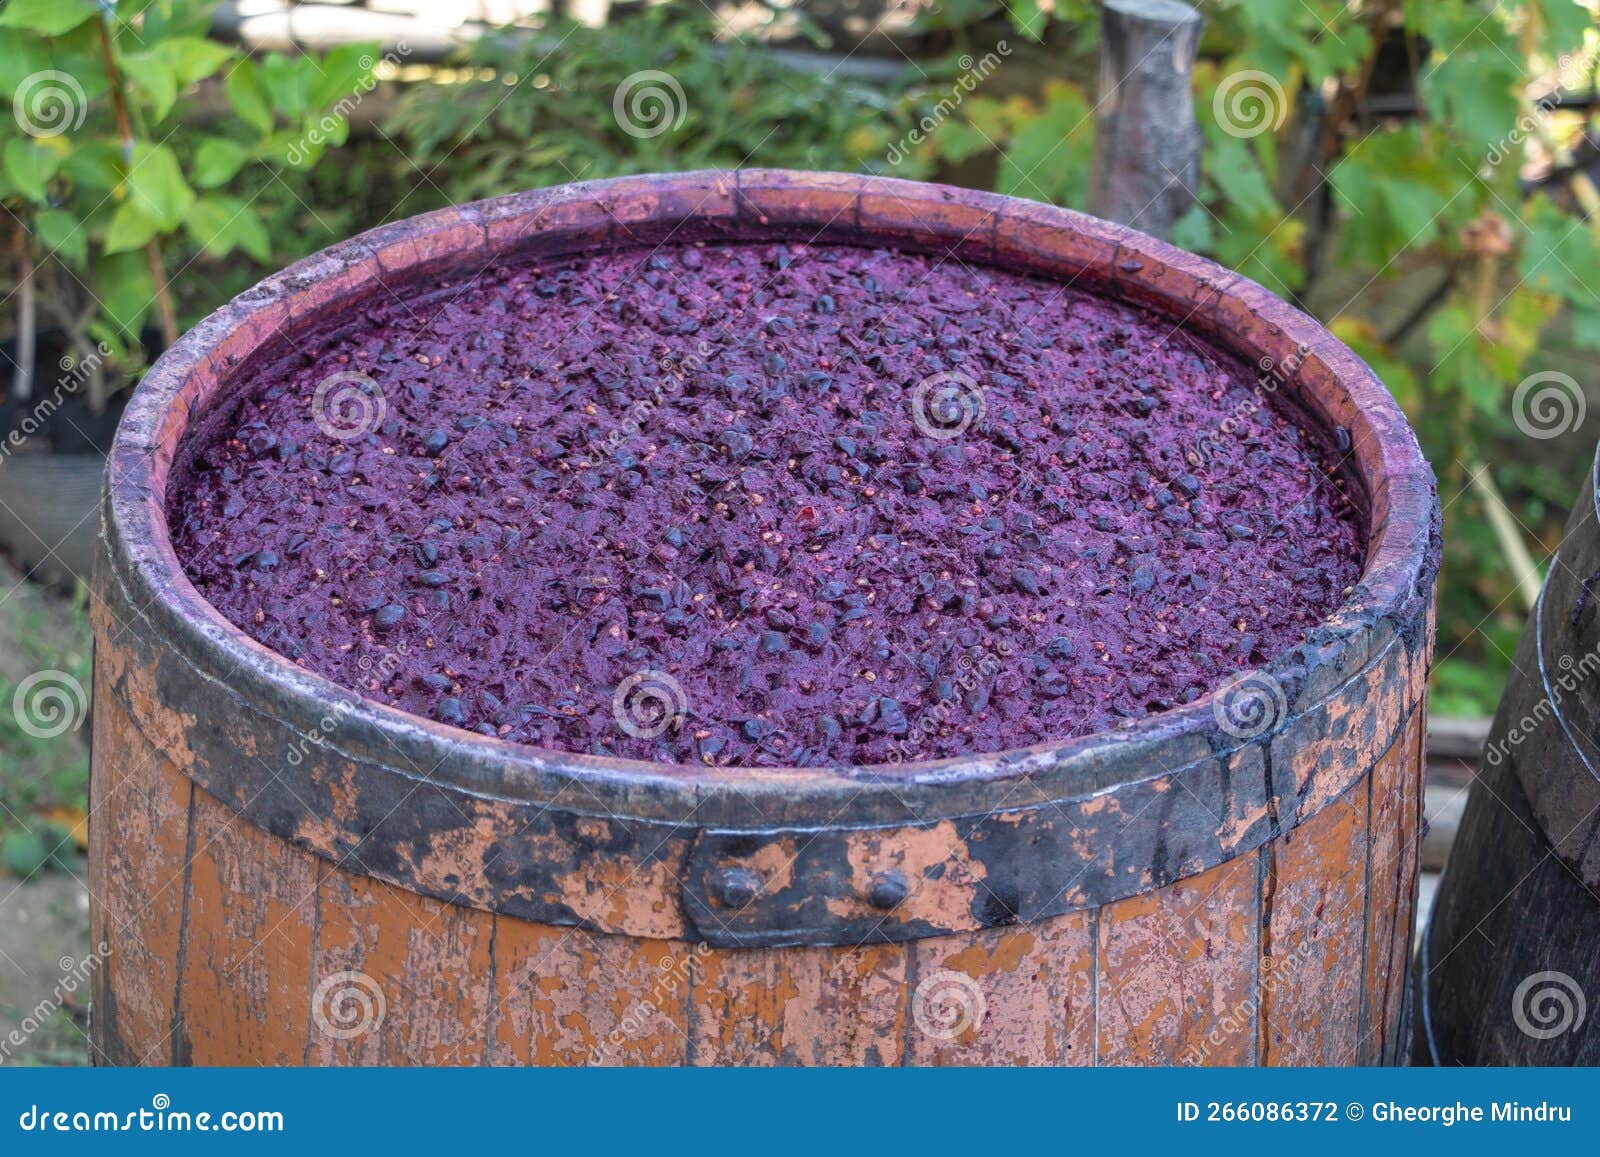 red wine that ferments in a wooden barrel - in the process of making wine concept